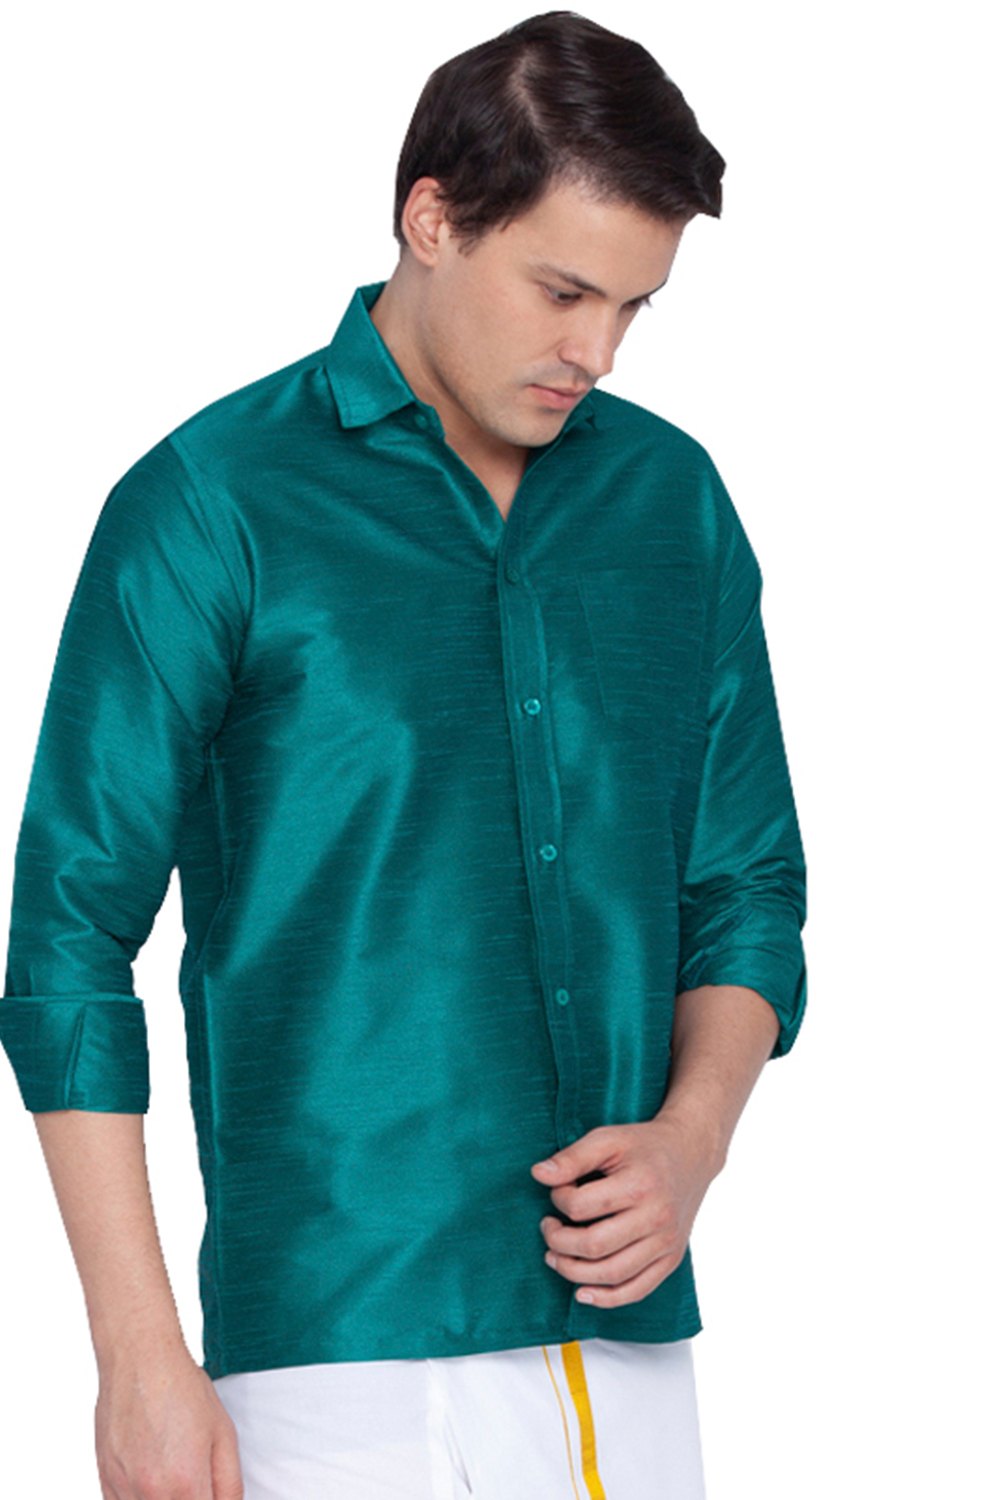 Buy Ethnic Shirts online in India